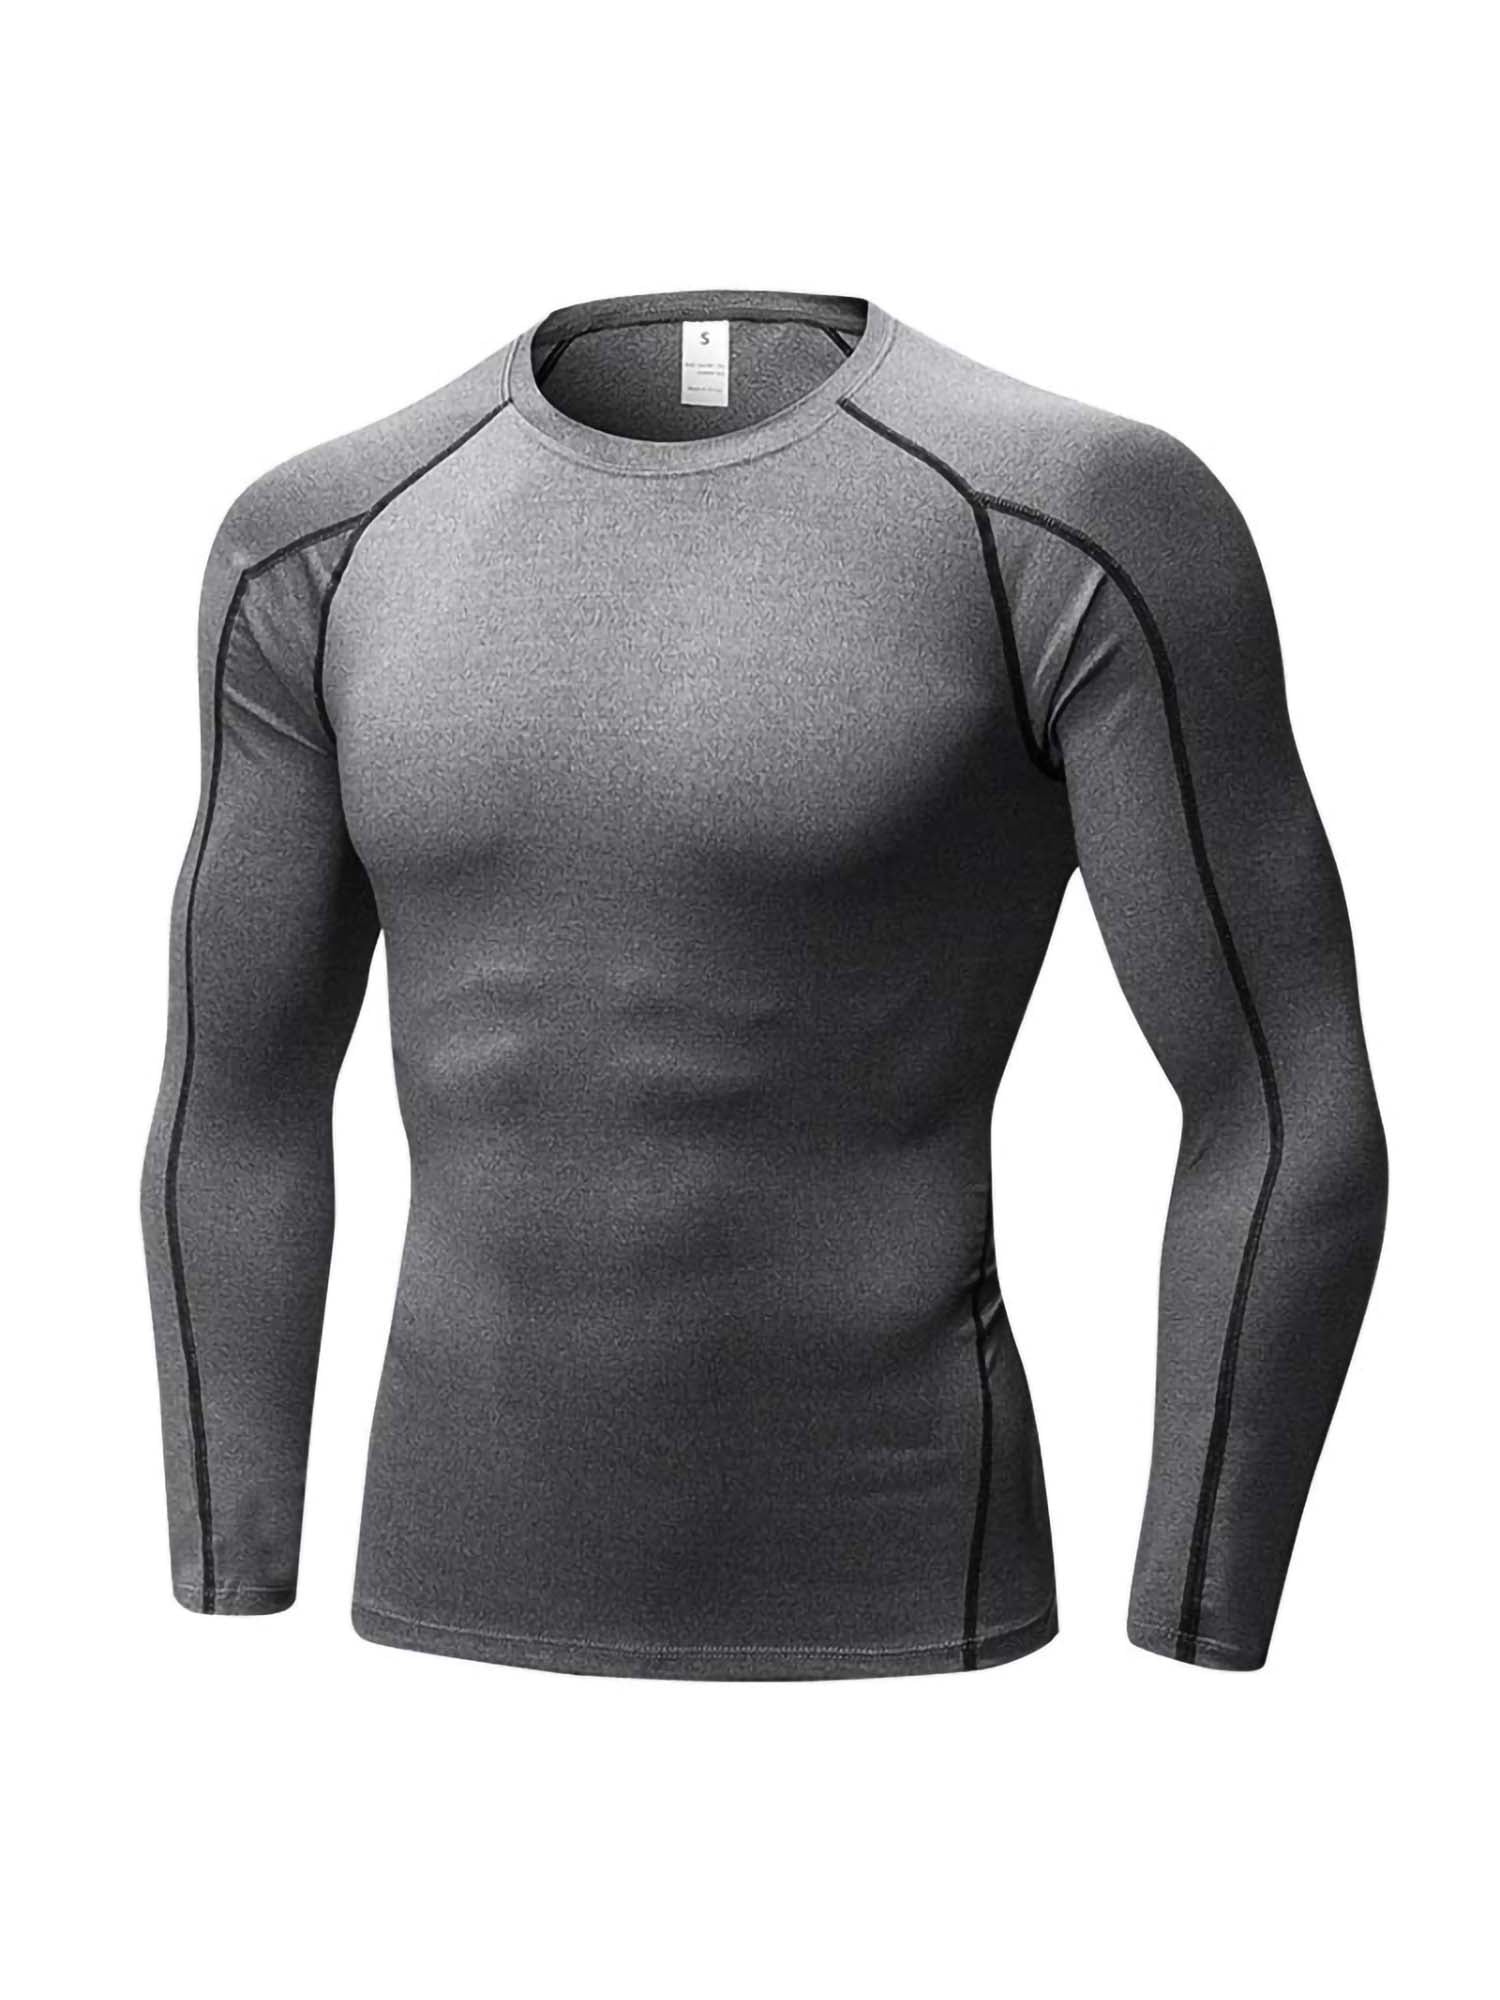 Men's Compression Mock T-Shirt Cool Dry Baselayer Moisture Wicking Long-Sleeved 